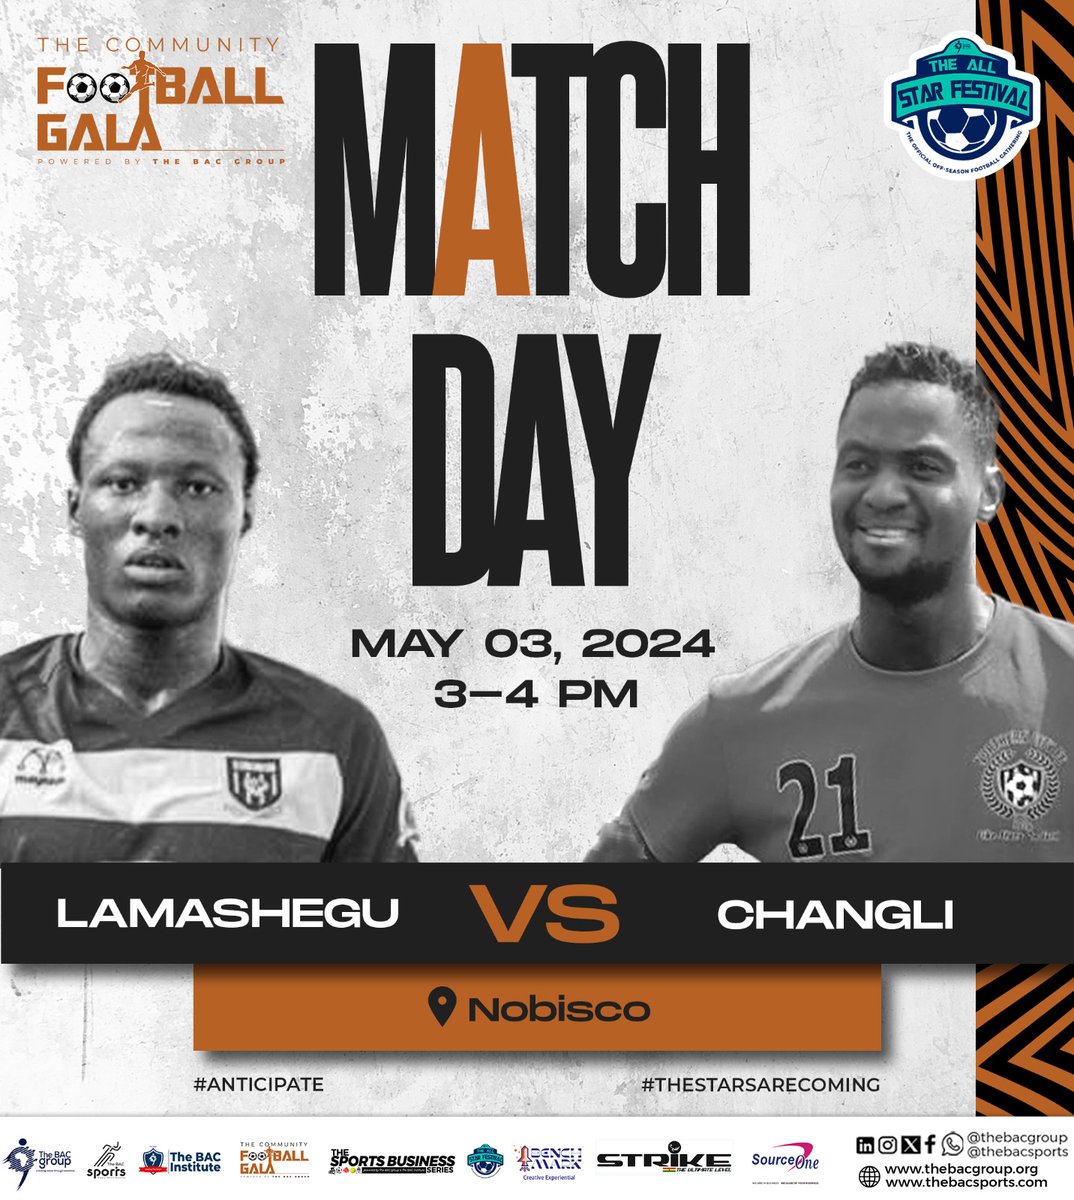 It's Match day in Tamale. Nobisco Park will be the center of attraction as #Lamashegu locks horns with #Changli in the All Star Festival Community Football Gala. #AllStarFestival2024 #CommunityGala